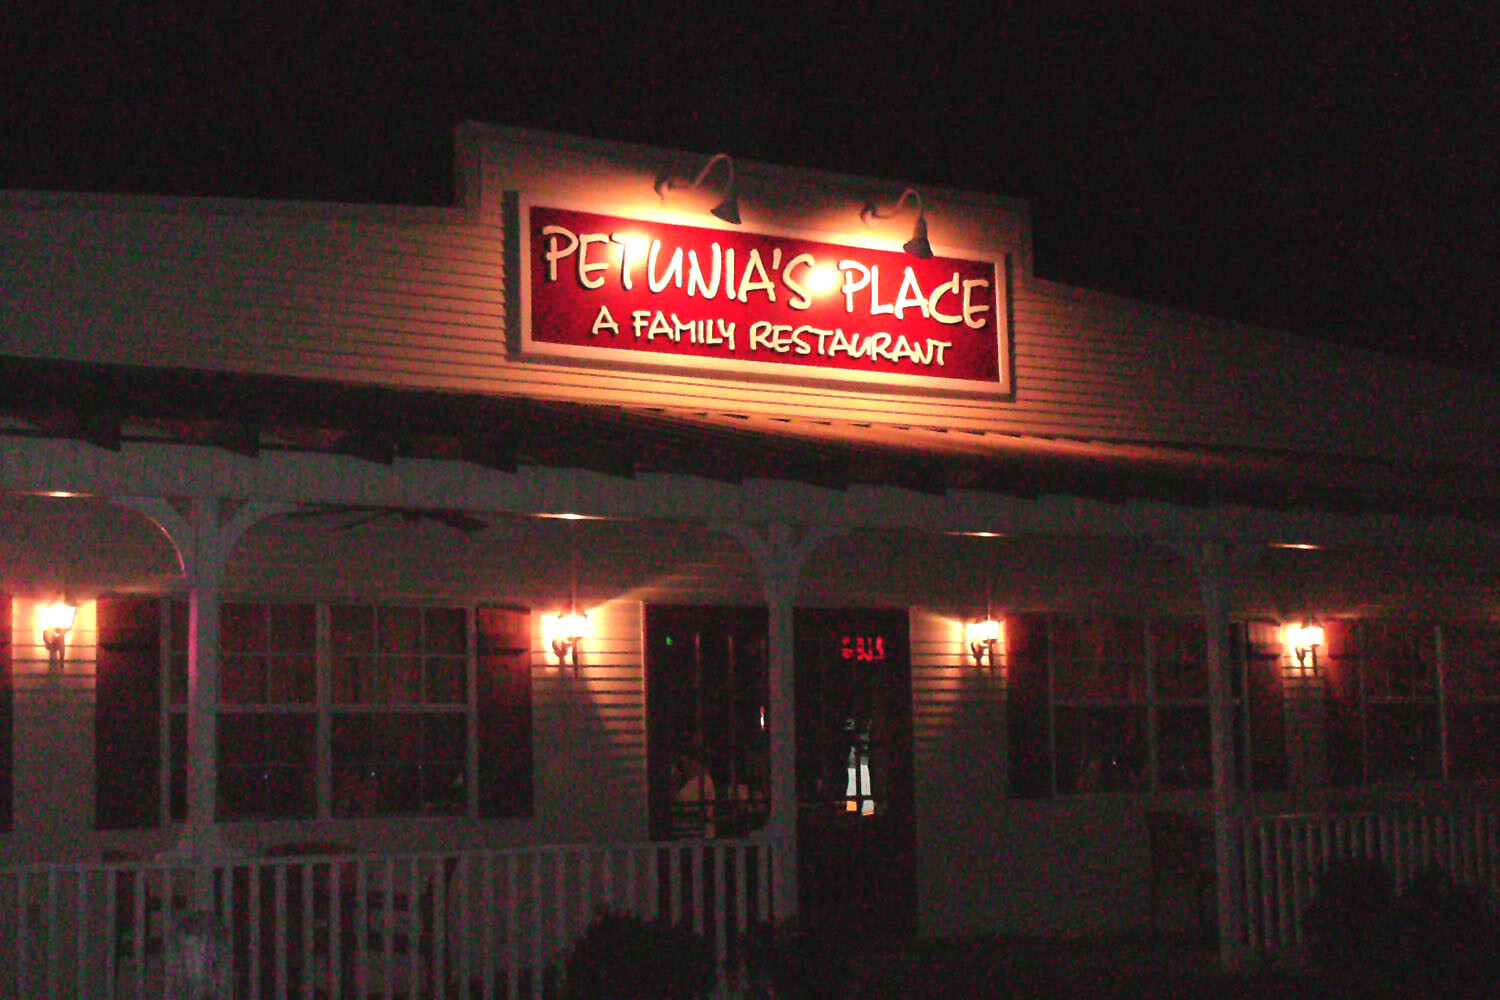 Petunias Place Exterior Letters at Night